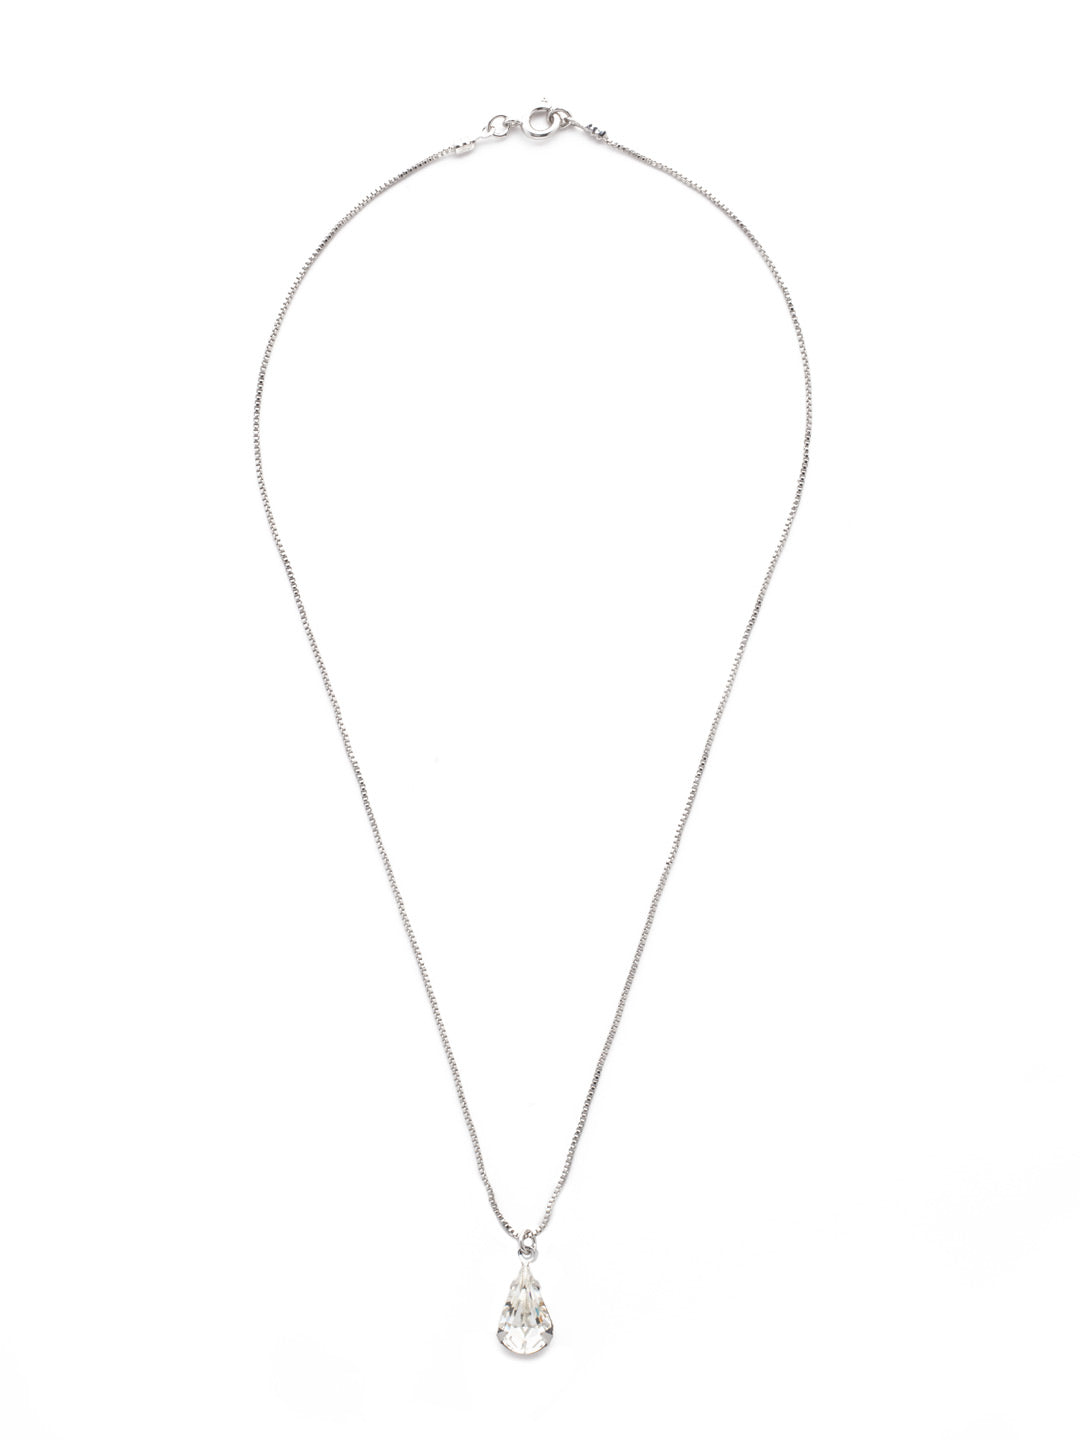 Dana Pendant Necklace - NEV100PDCRY - <p>The Dana Pendant Necklace features a single pear-shaped crystal on a dainty chain, secured with a spring ring clasp. From Sorrelli's Crystal collection in our Palladium finish.</p>